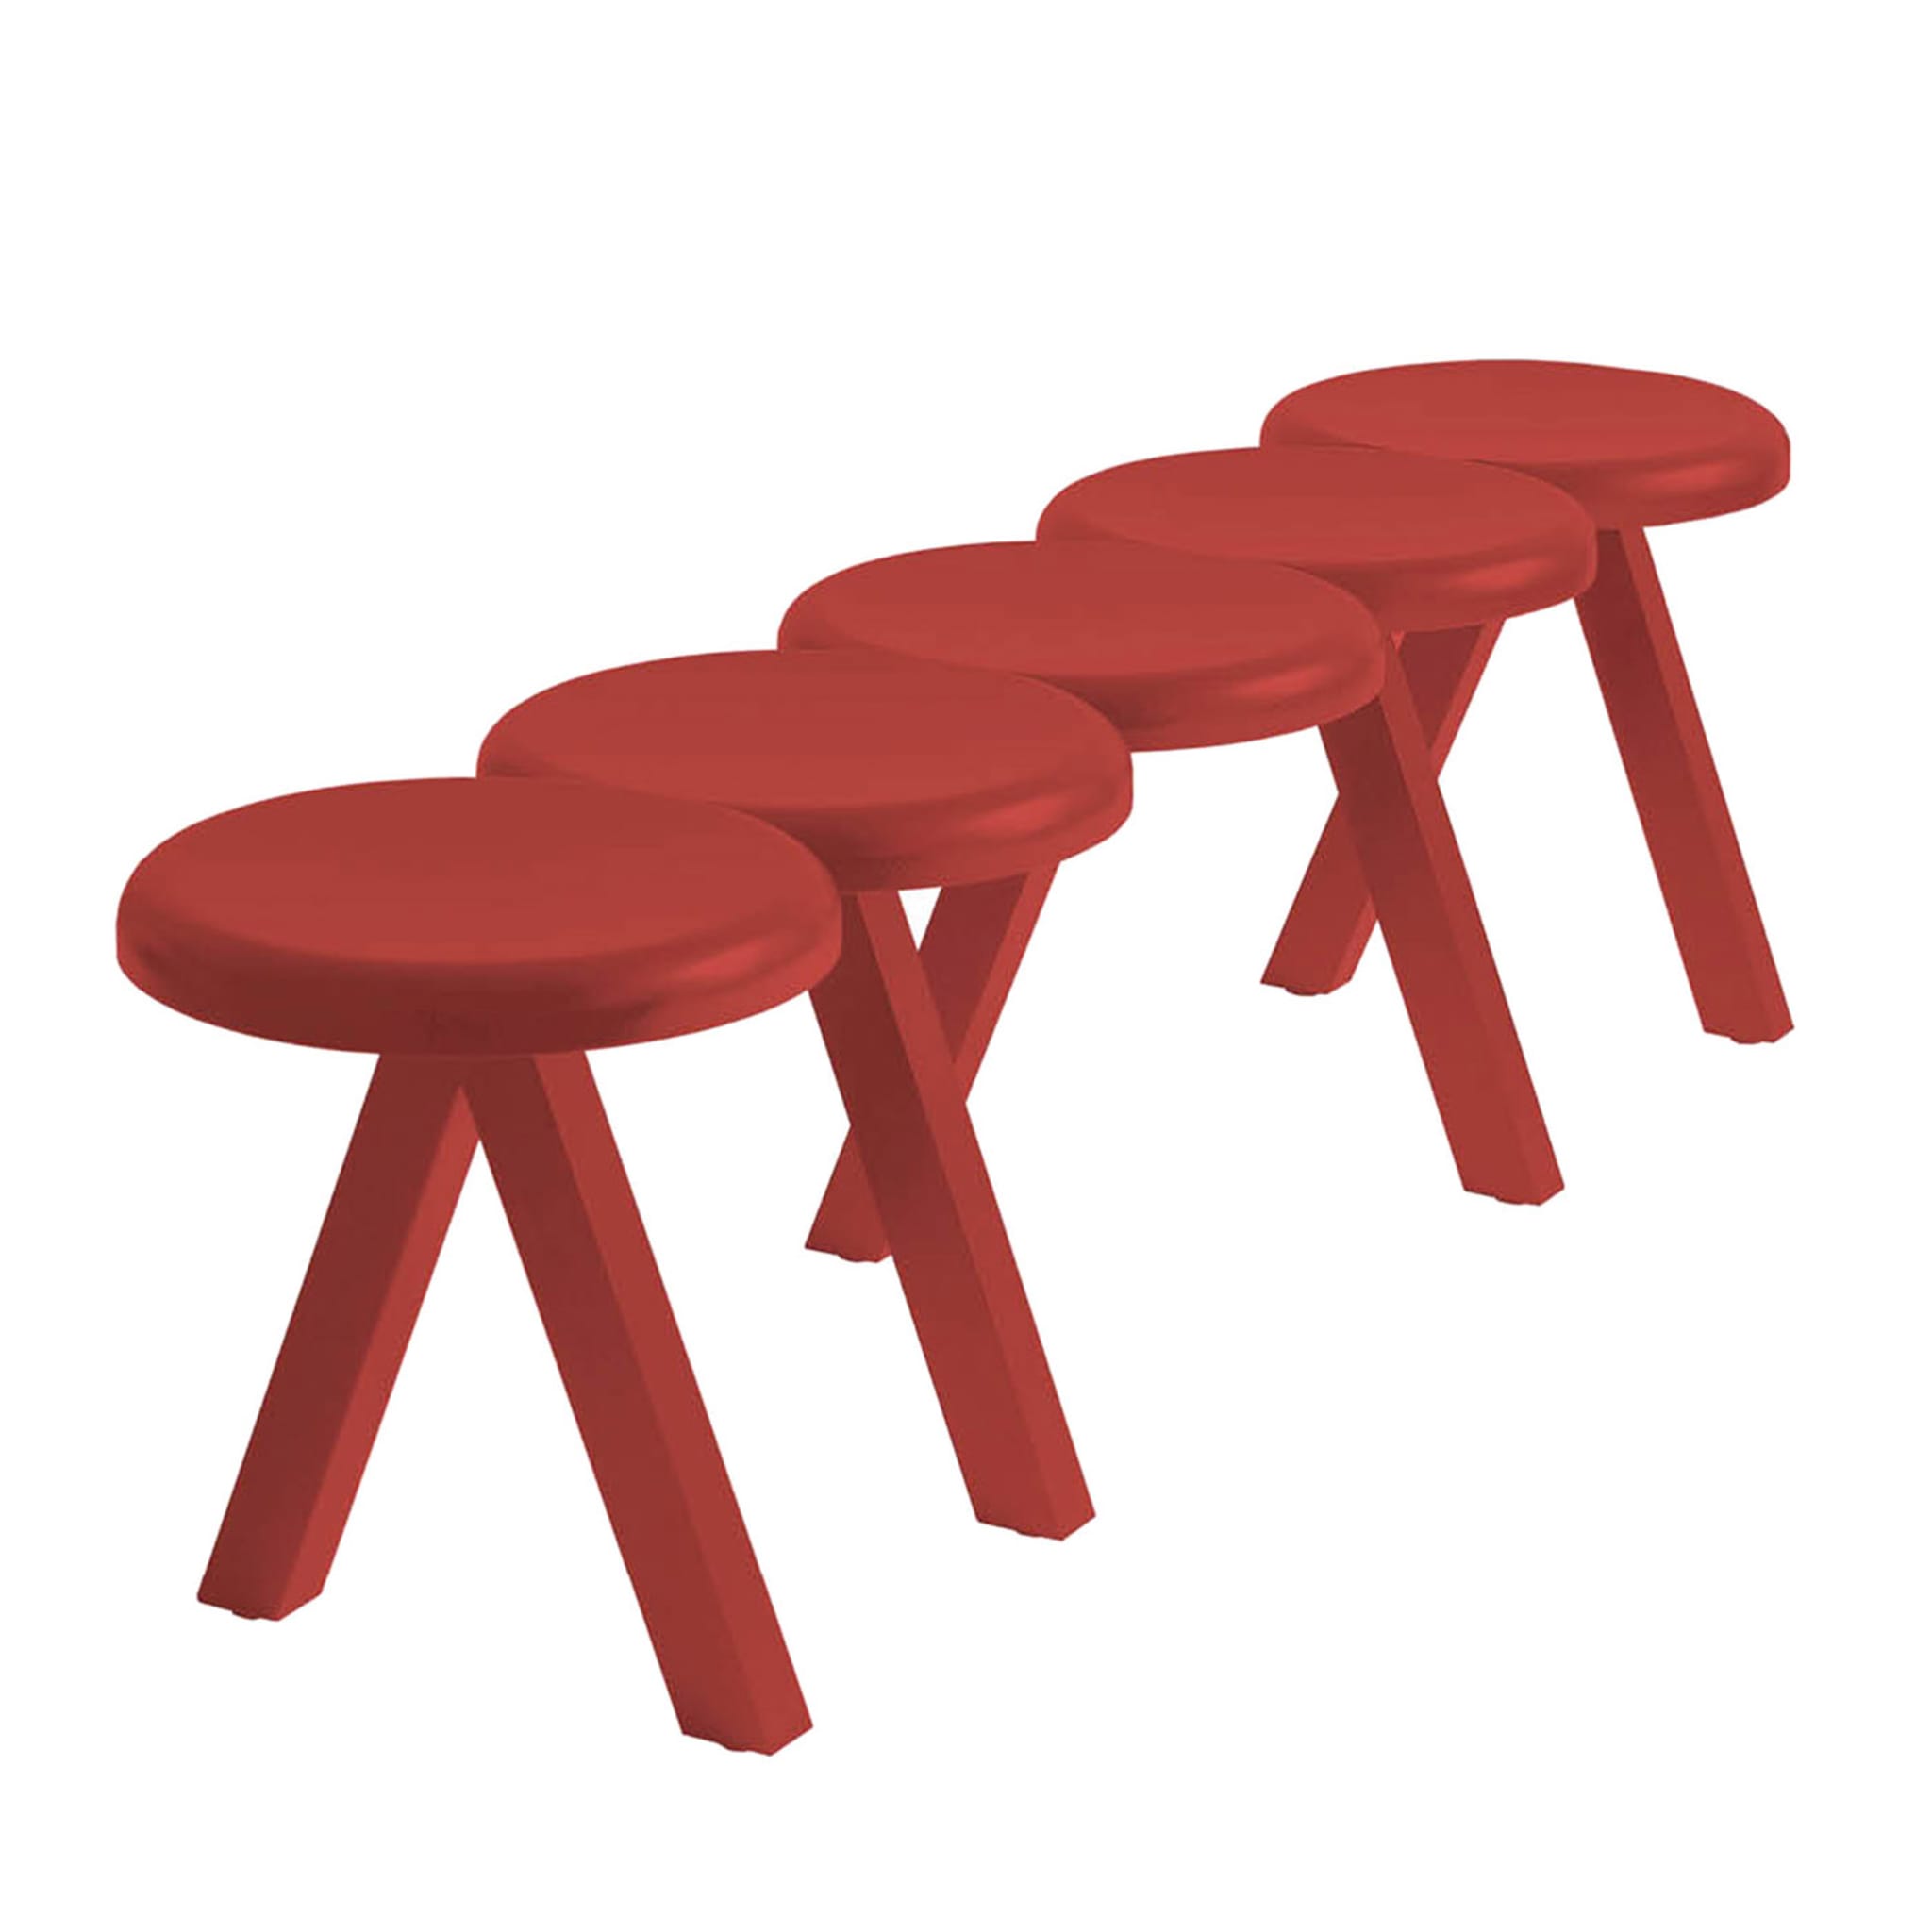 Millepiedi 5-Seat Red Bench by Studio Catoir - Main view